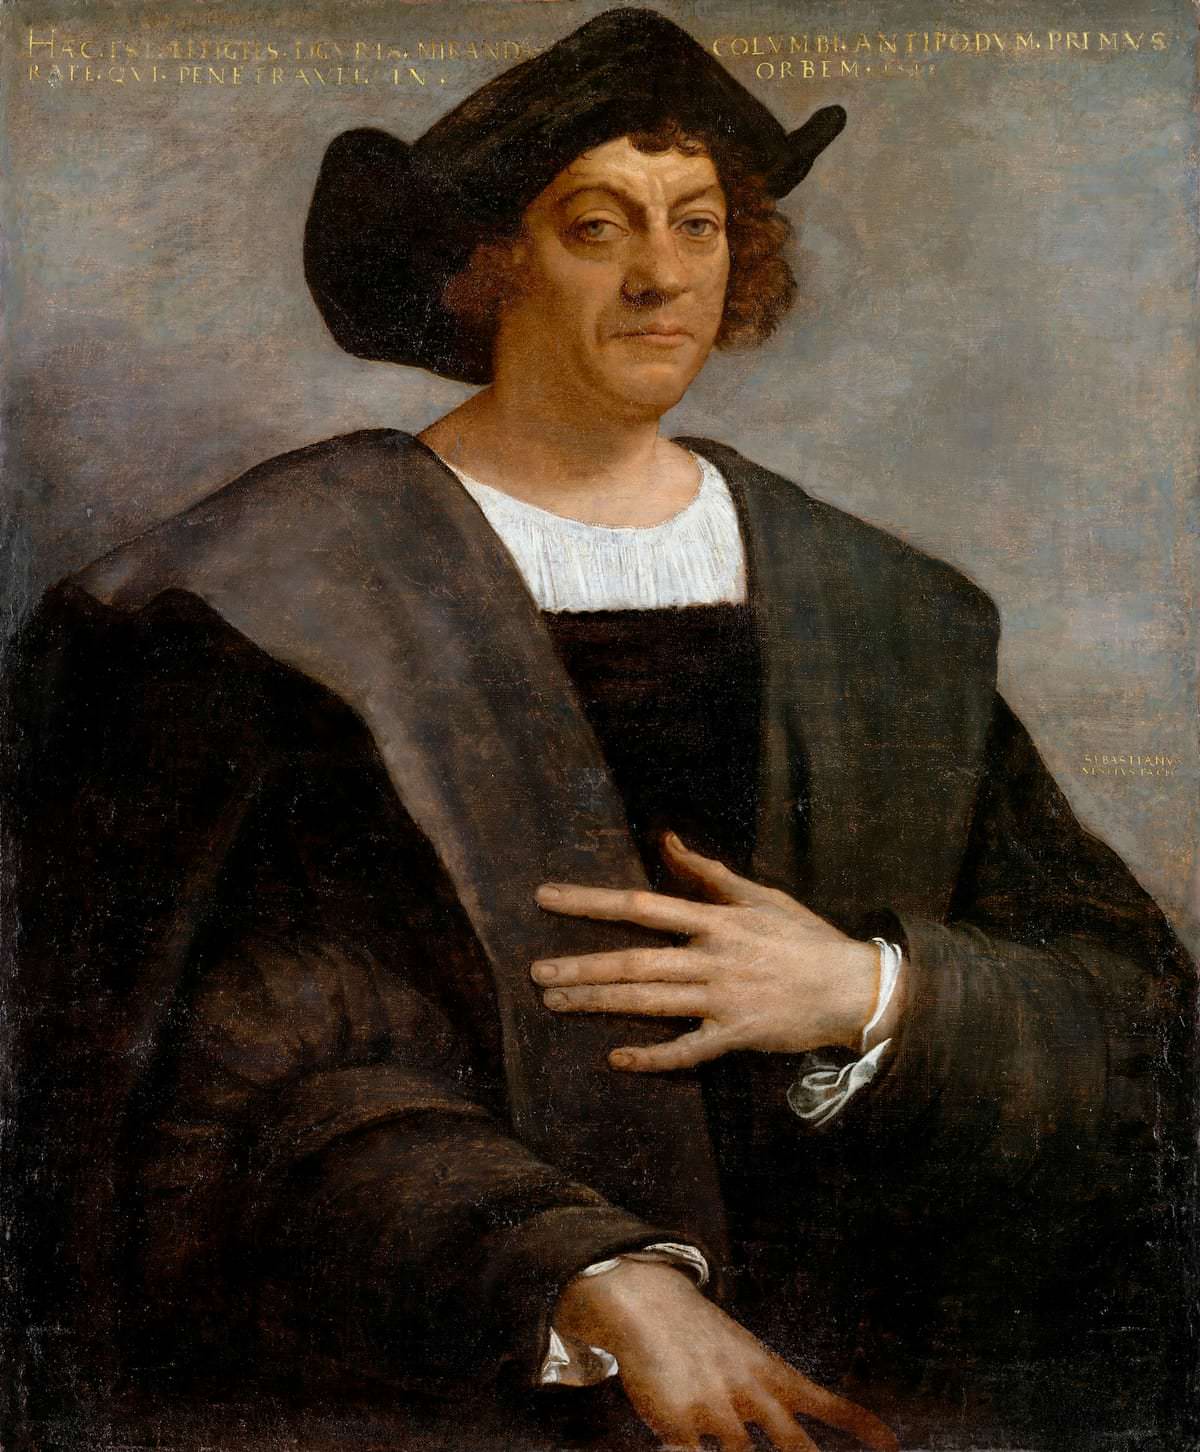 Christopher Columbus' First Journey